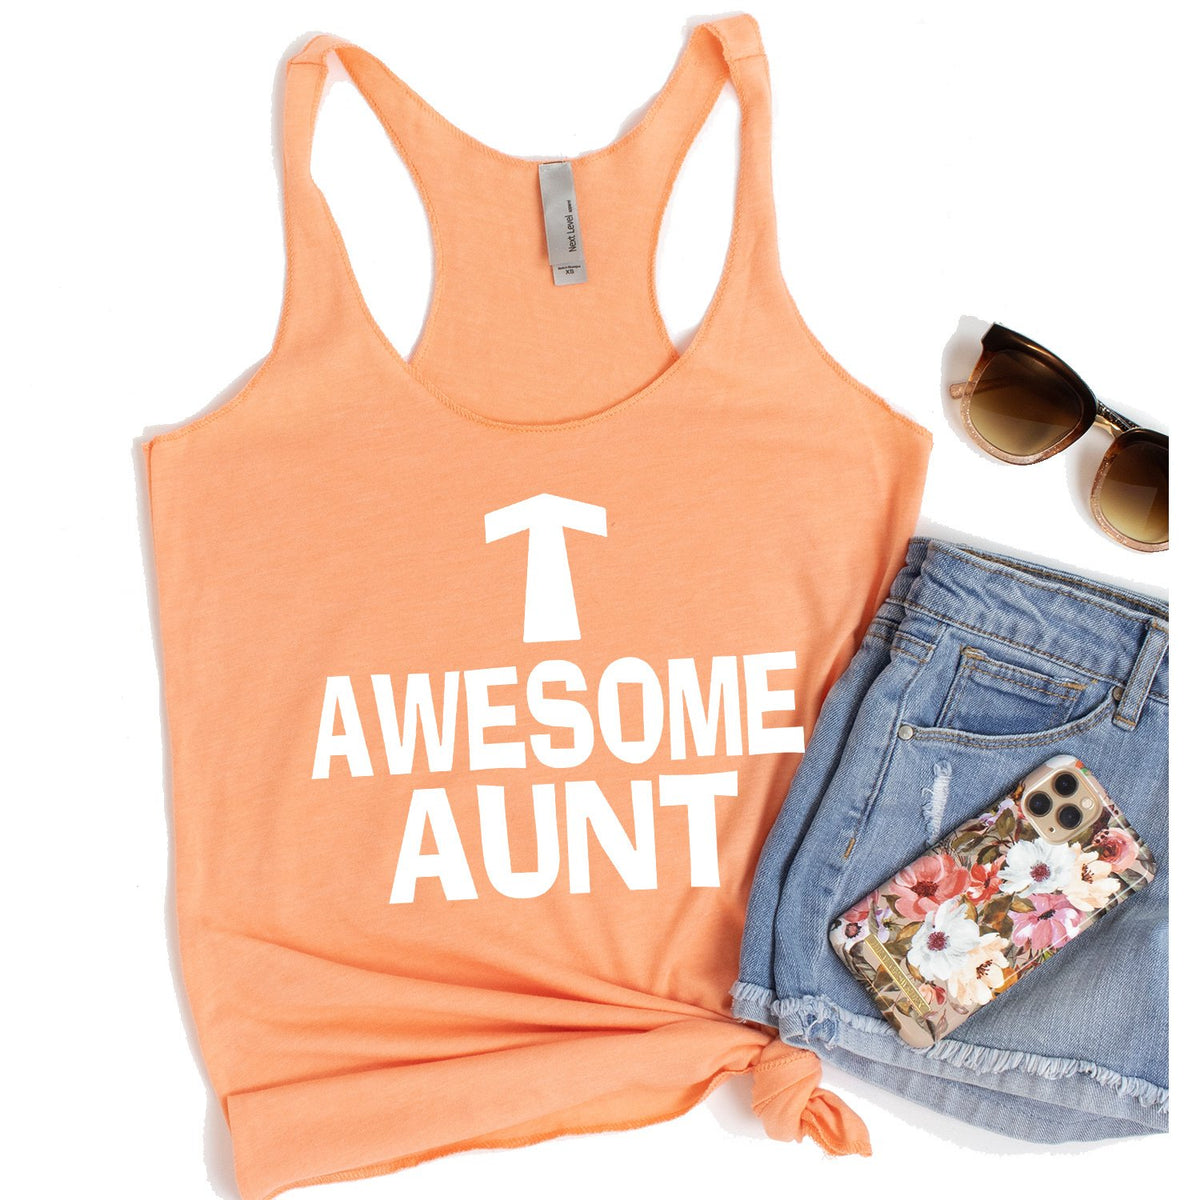 Awesome Aunt - Tank Top Racerback